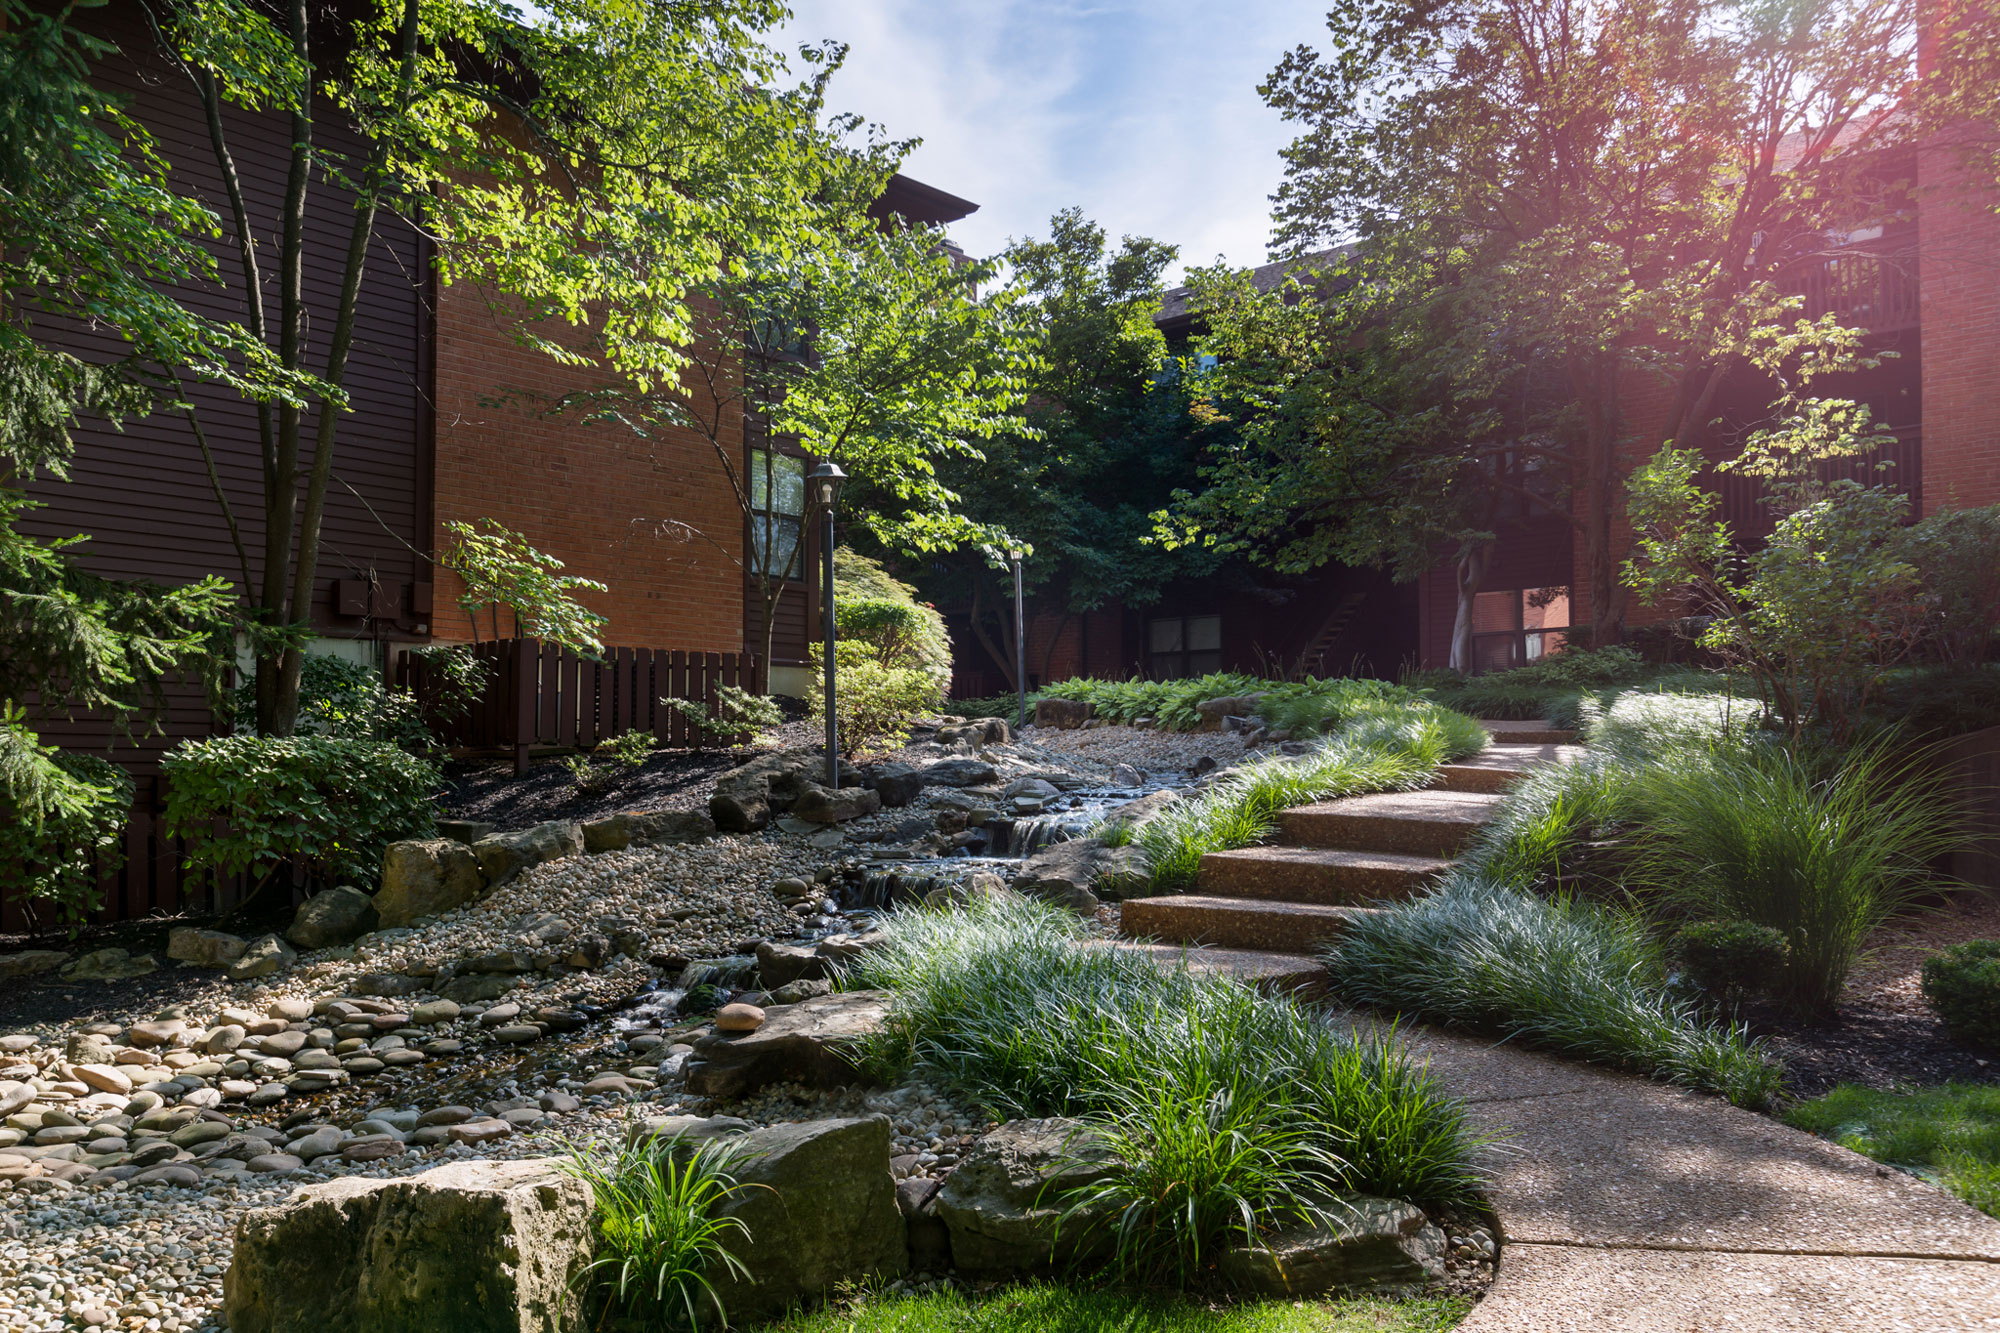 The Chesterfield Village Apartments babbling brook